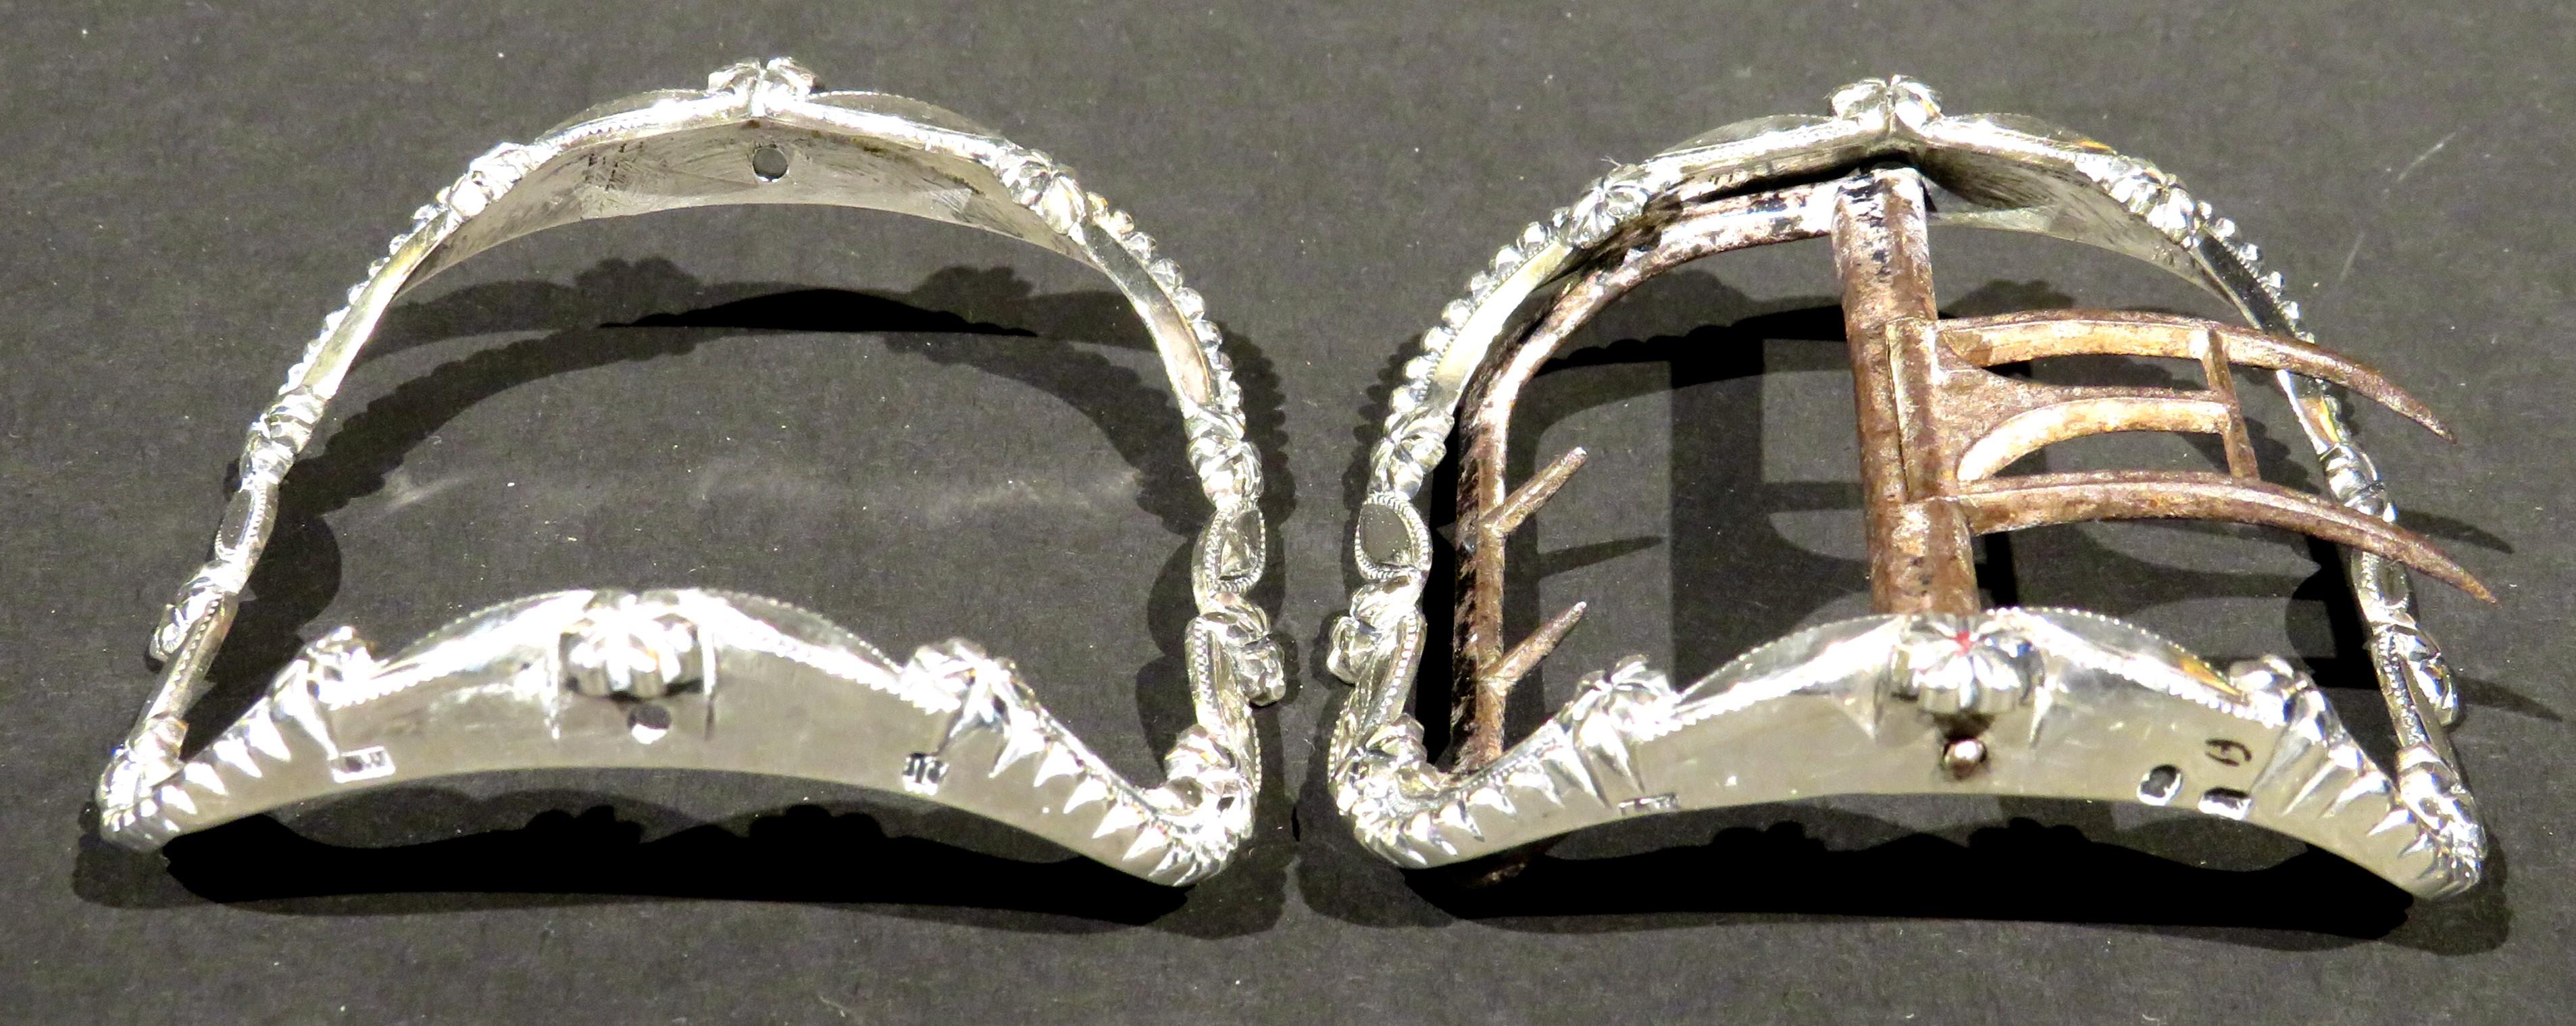 A fine pair of 18th century British sterling silver shoe buckles of exceptional quality. Both showing curvilinear shaped segments interspersed by flower-heads & leaf shaped elements, decorated with hand engraved bright-cut detail. 
Both buckles